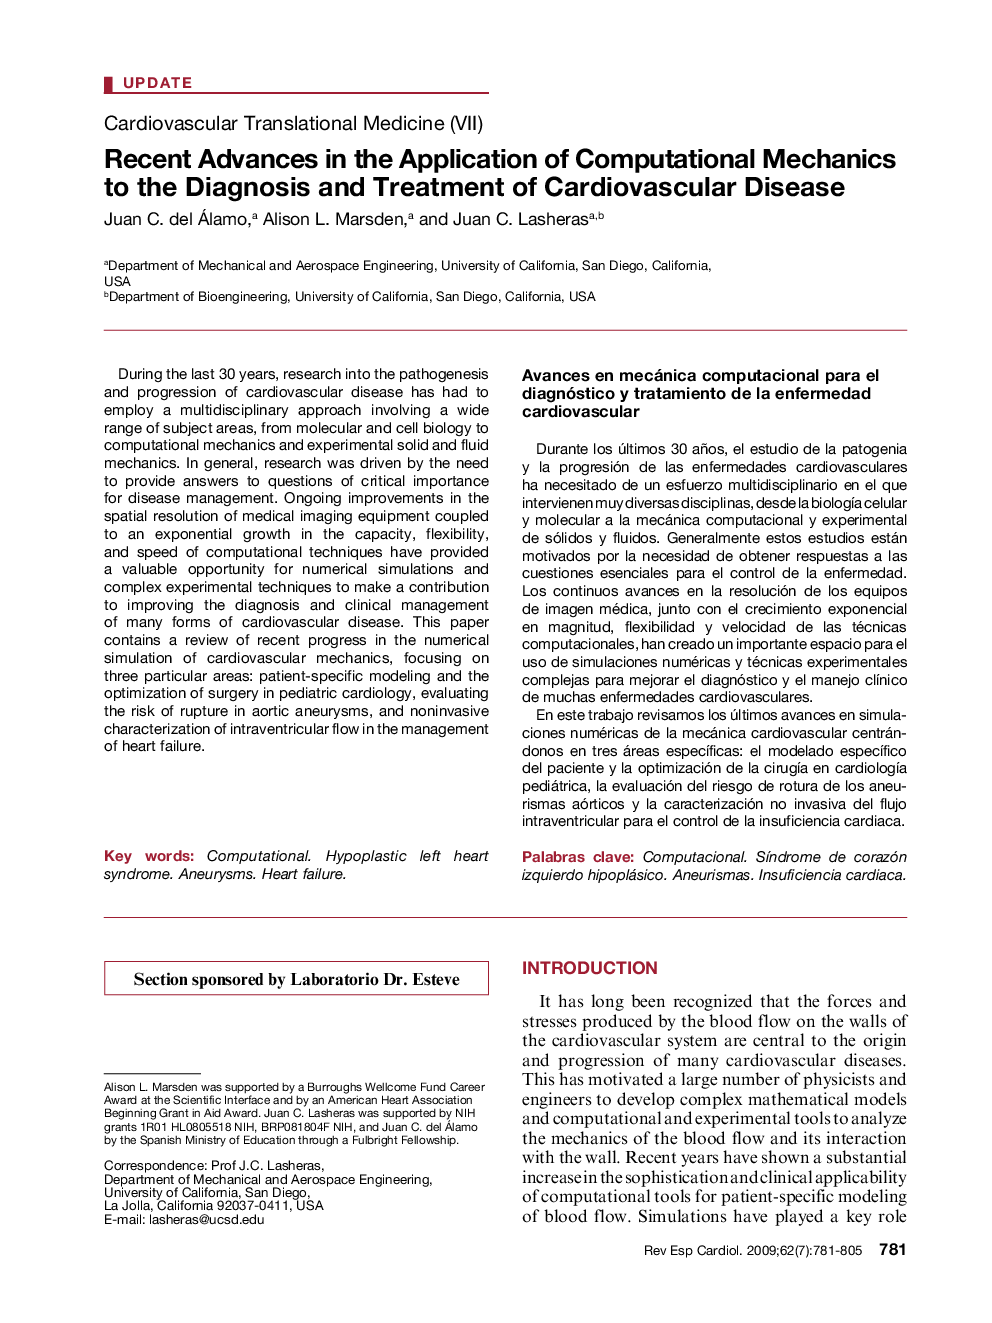 Recent Advances in the Application of Computational Mechanics to the Diagnosis and Treatment of Cardiovascular Disease